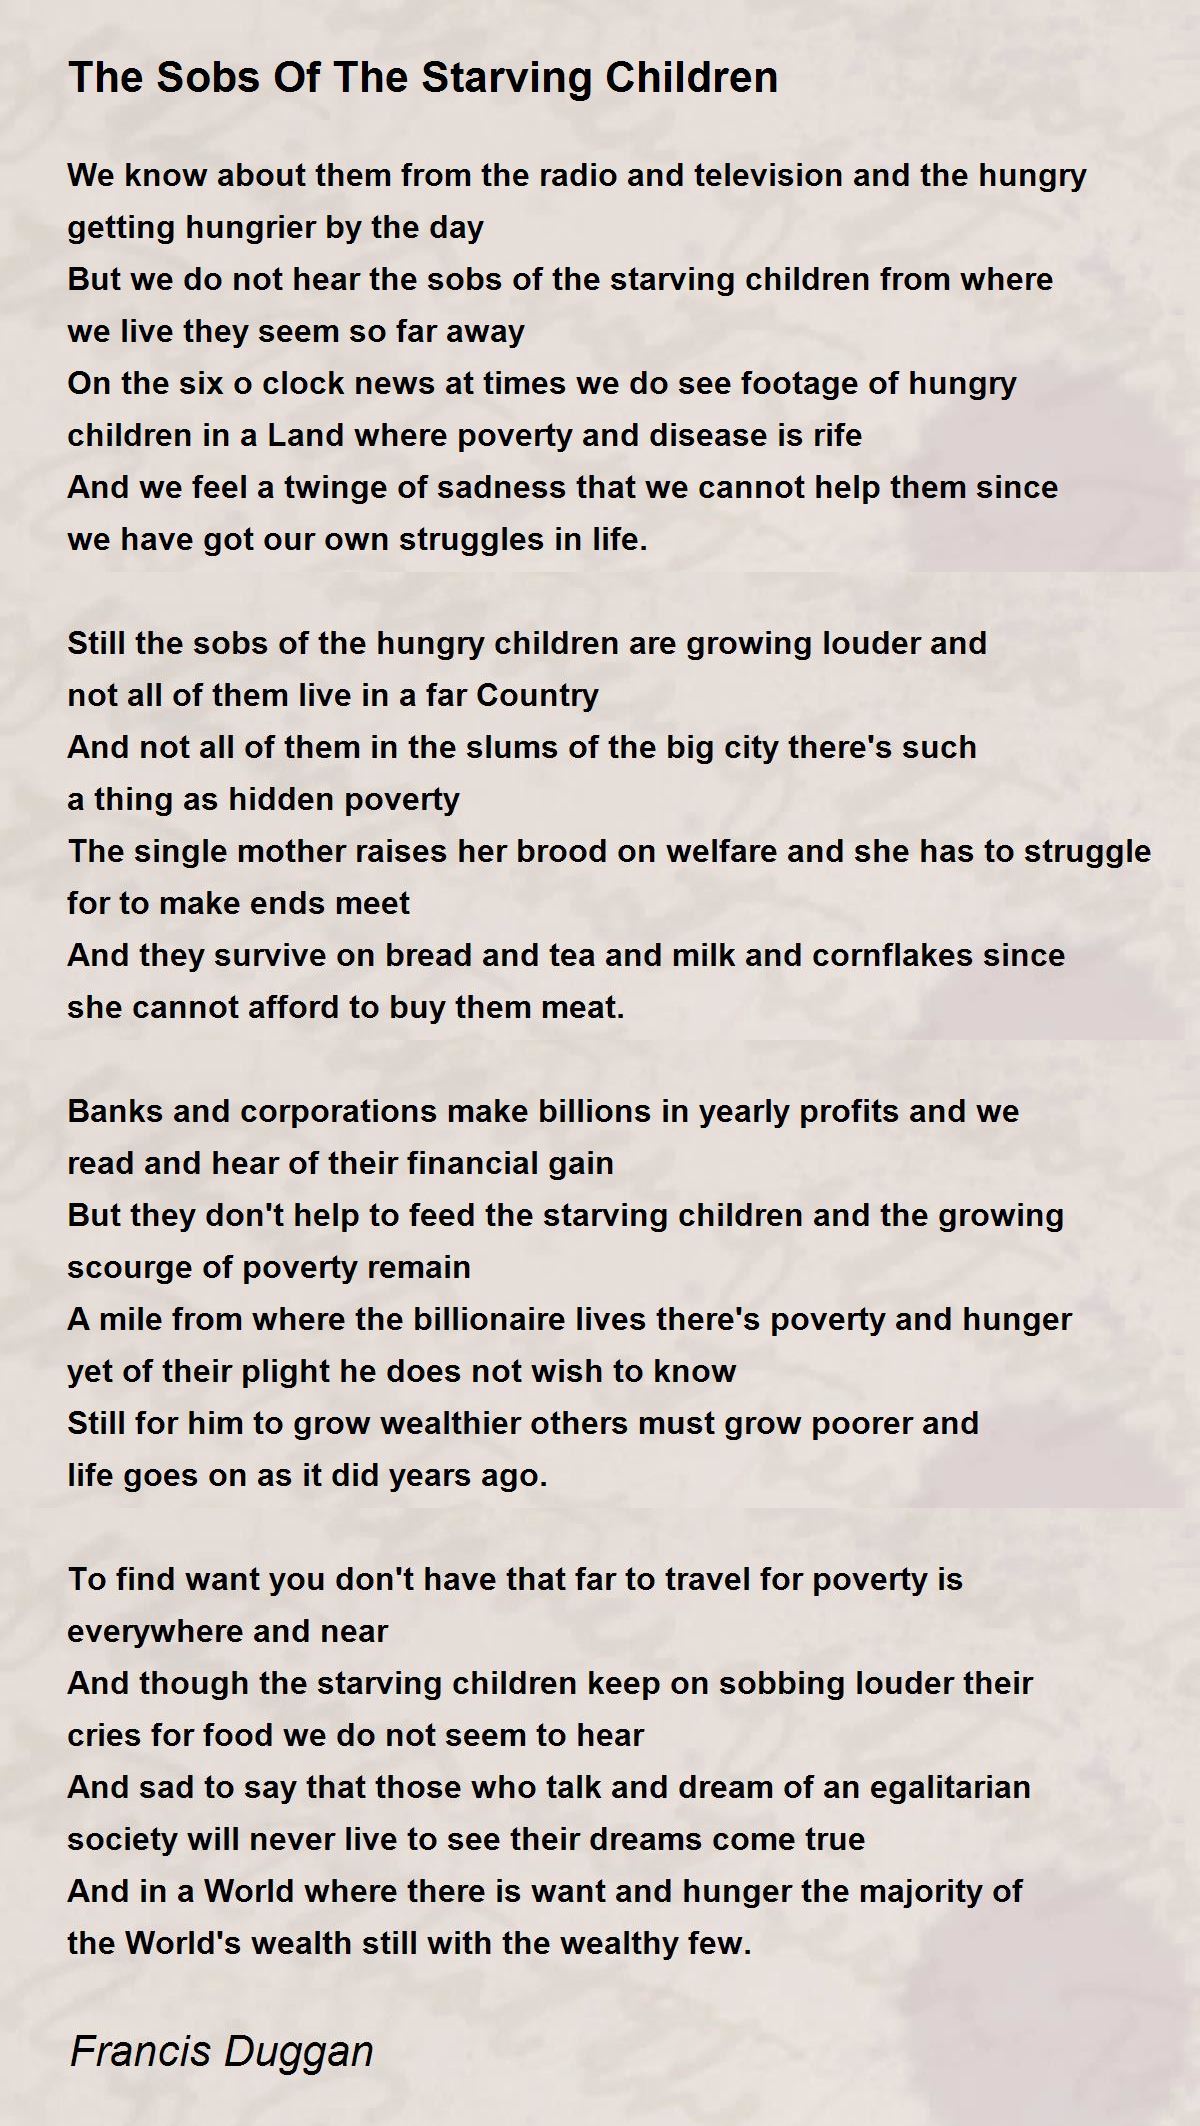 The Sobs Of The Starving Children - The Sobs Of The Starving Children ...